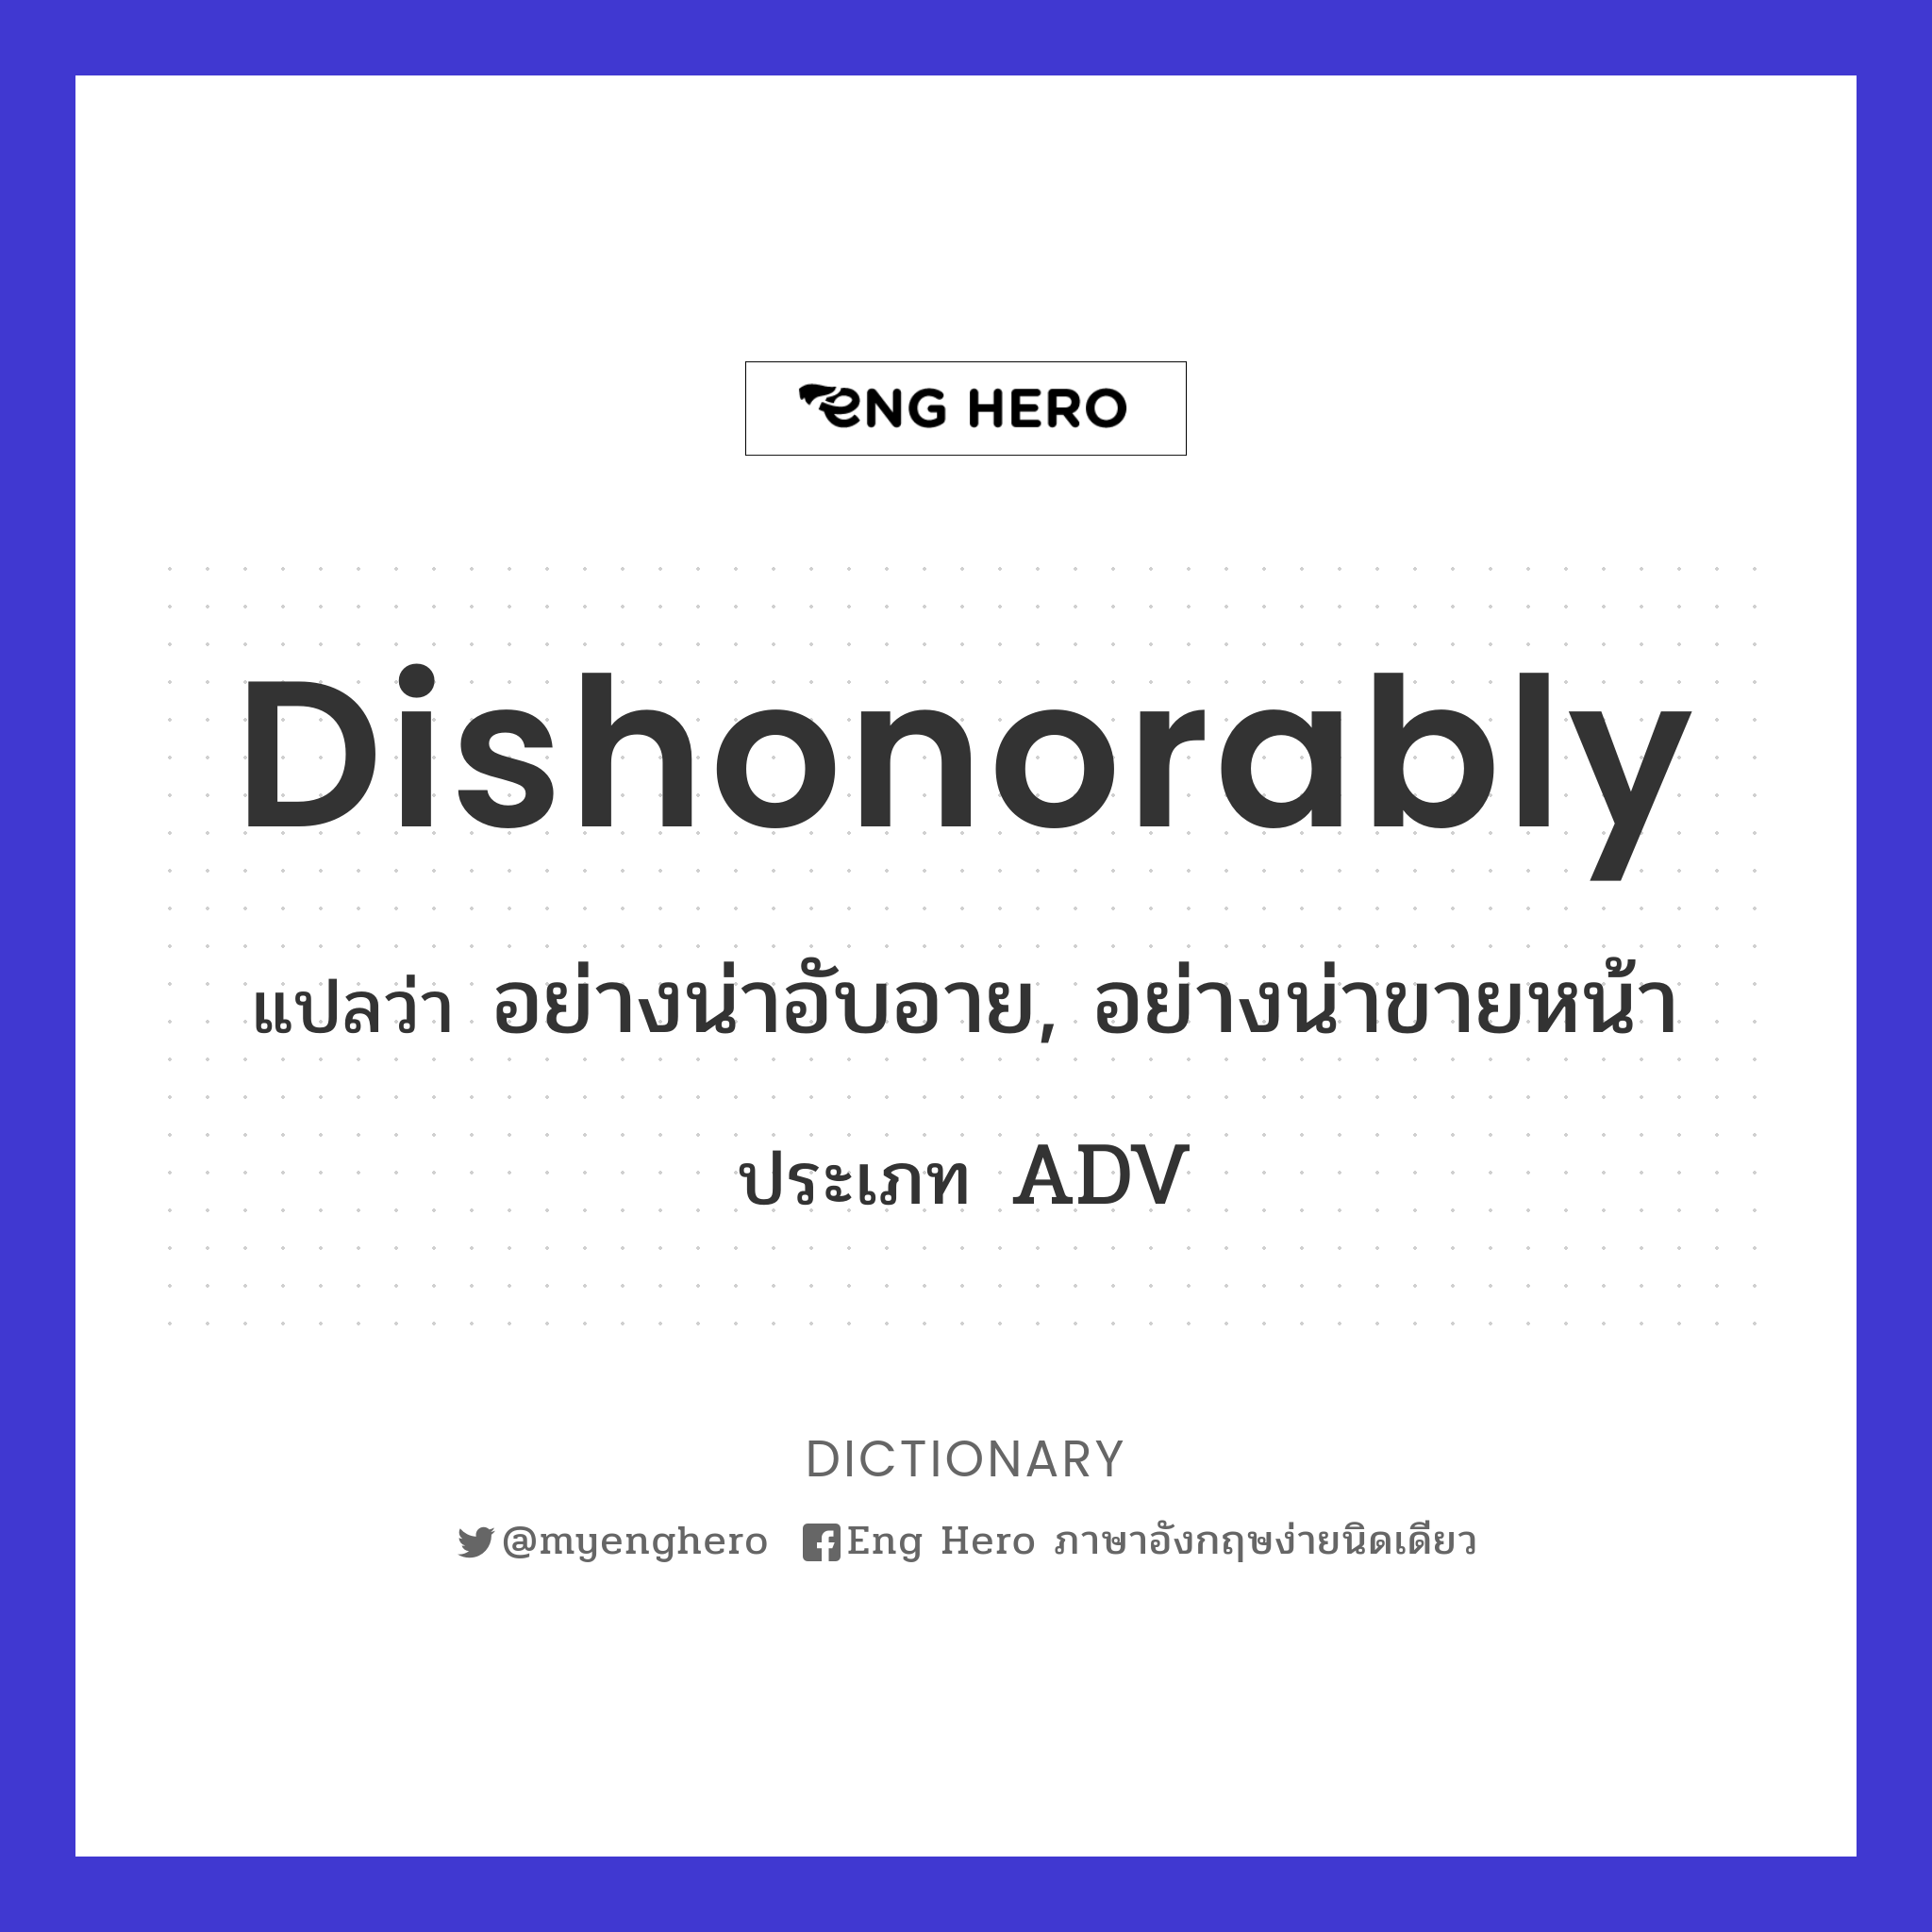 dishonorably